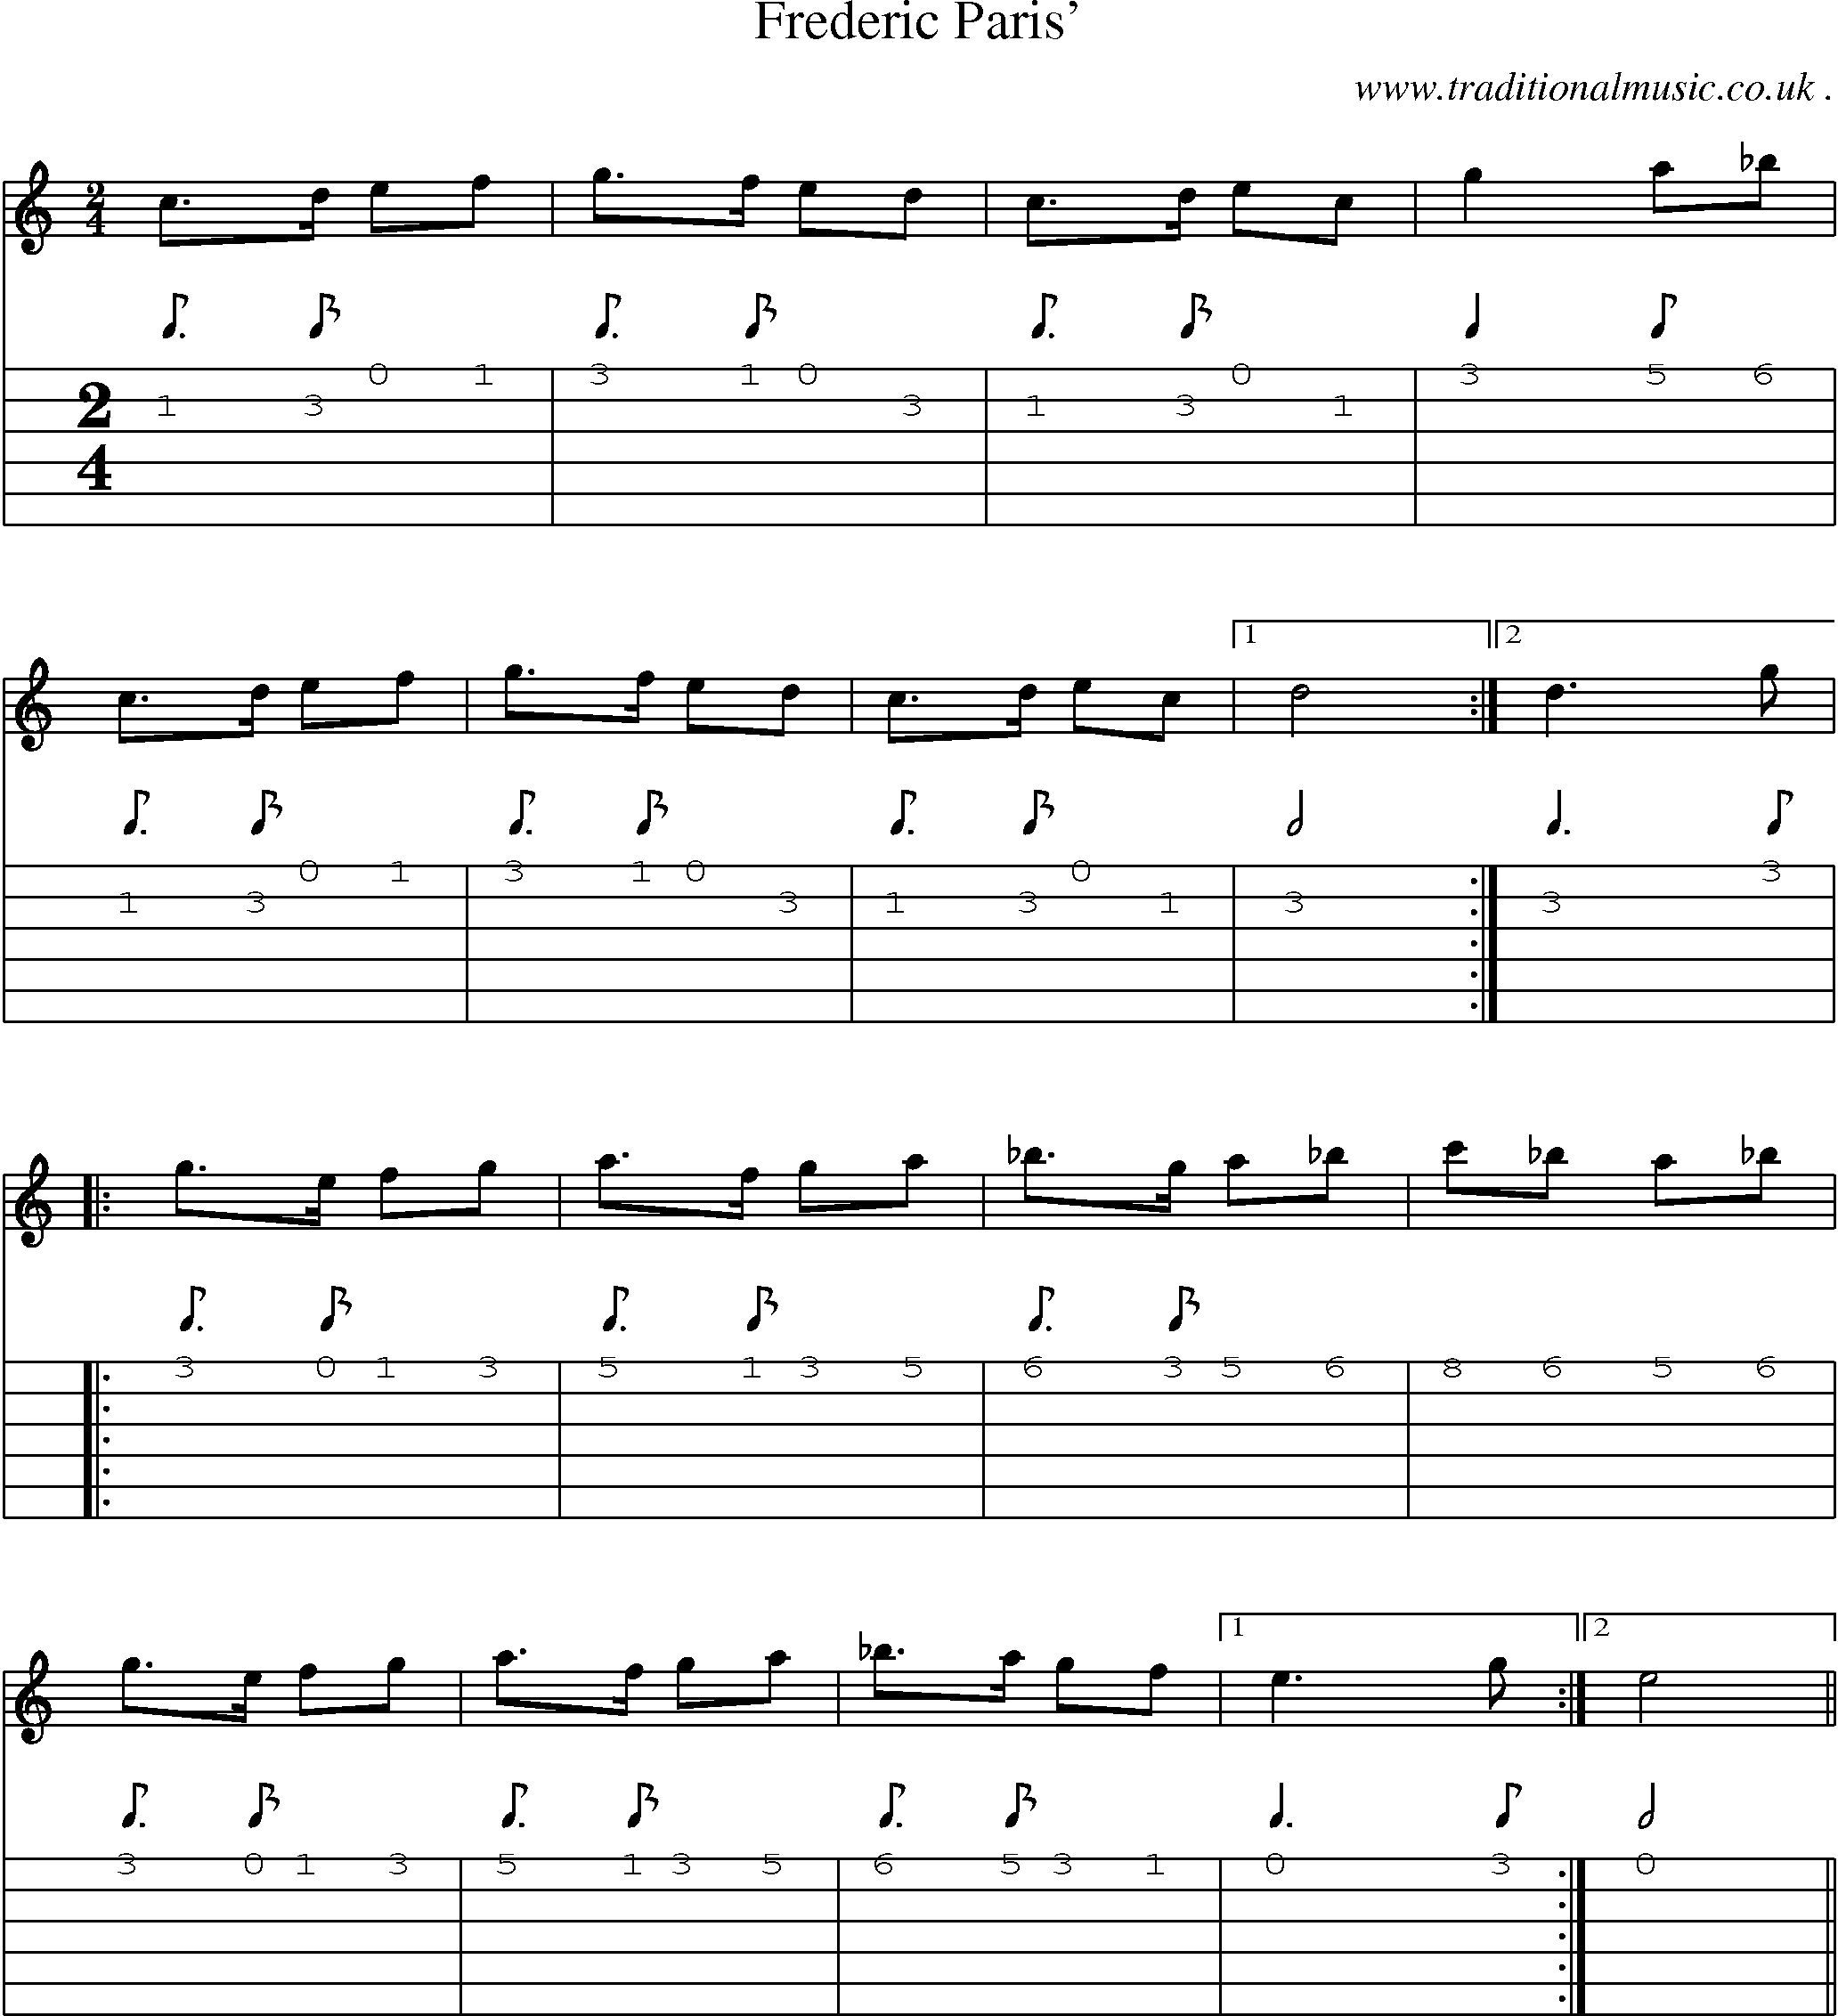 Sheet-Music and Guitar Tabs for Frederic Paris